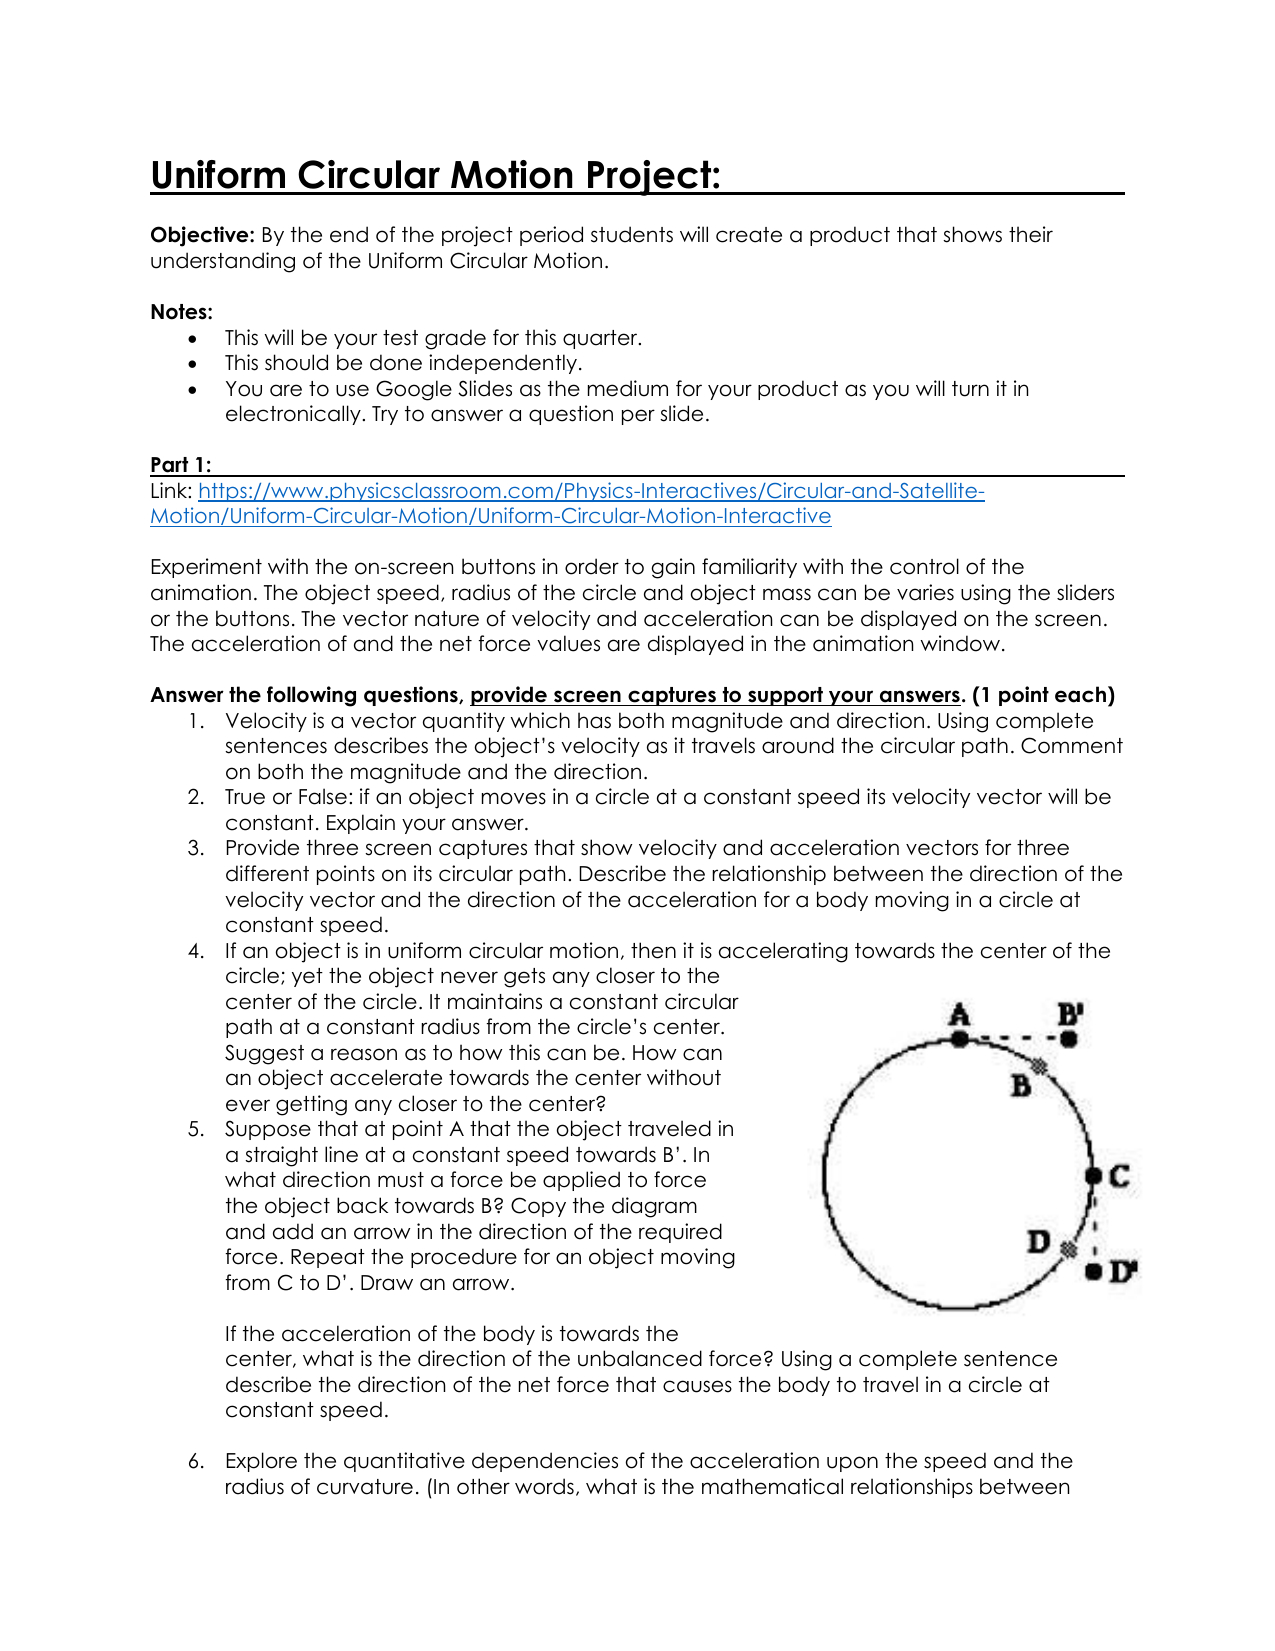 Circular And Satellite Motion Worksheet Answers | db-excel.com